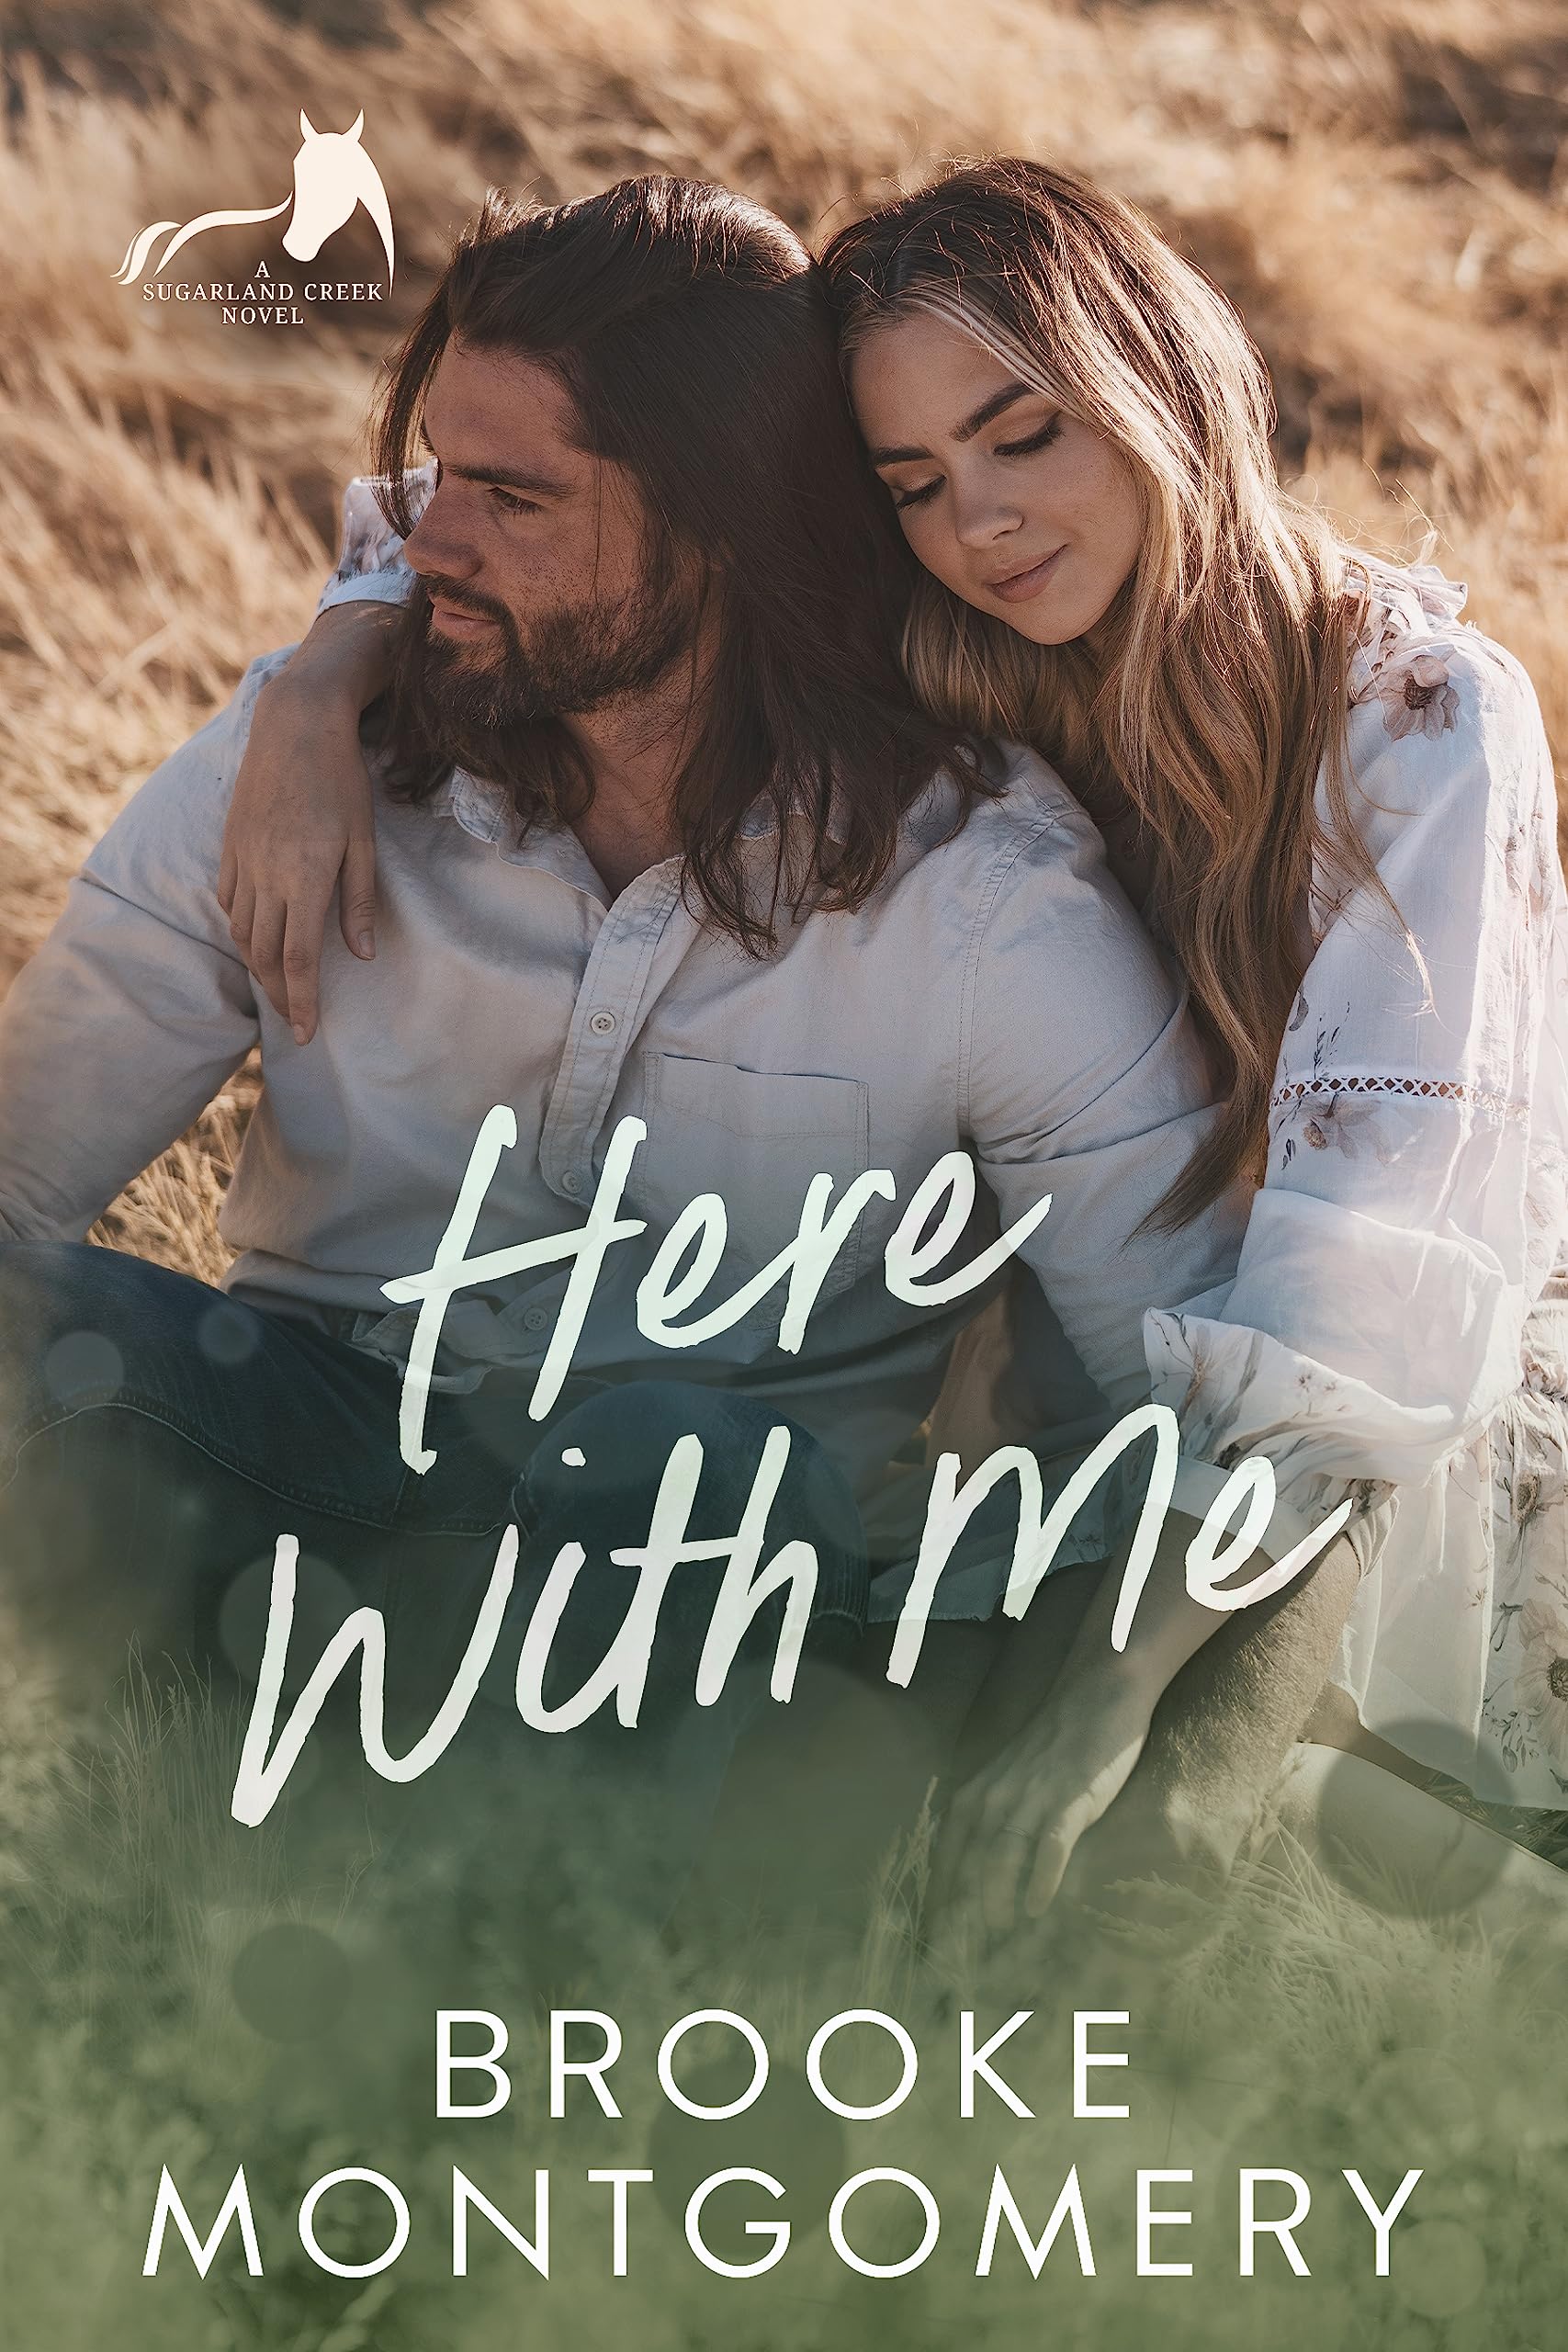 Here With Me: An Ex-boyfriend's Dad, Age Gap Small Town Romance (Sugarland Creek Book 1)